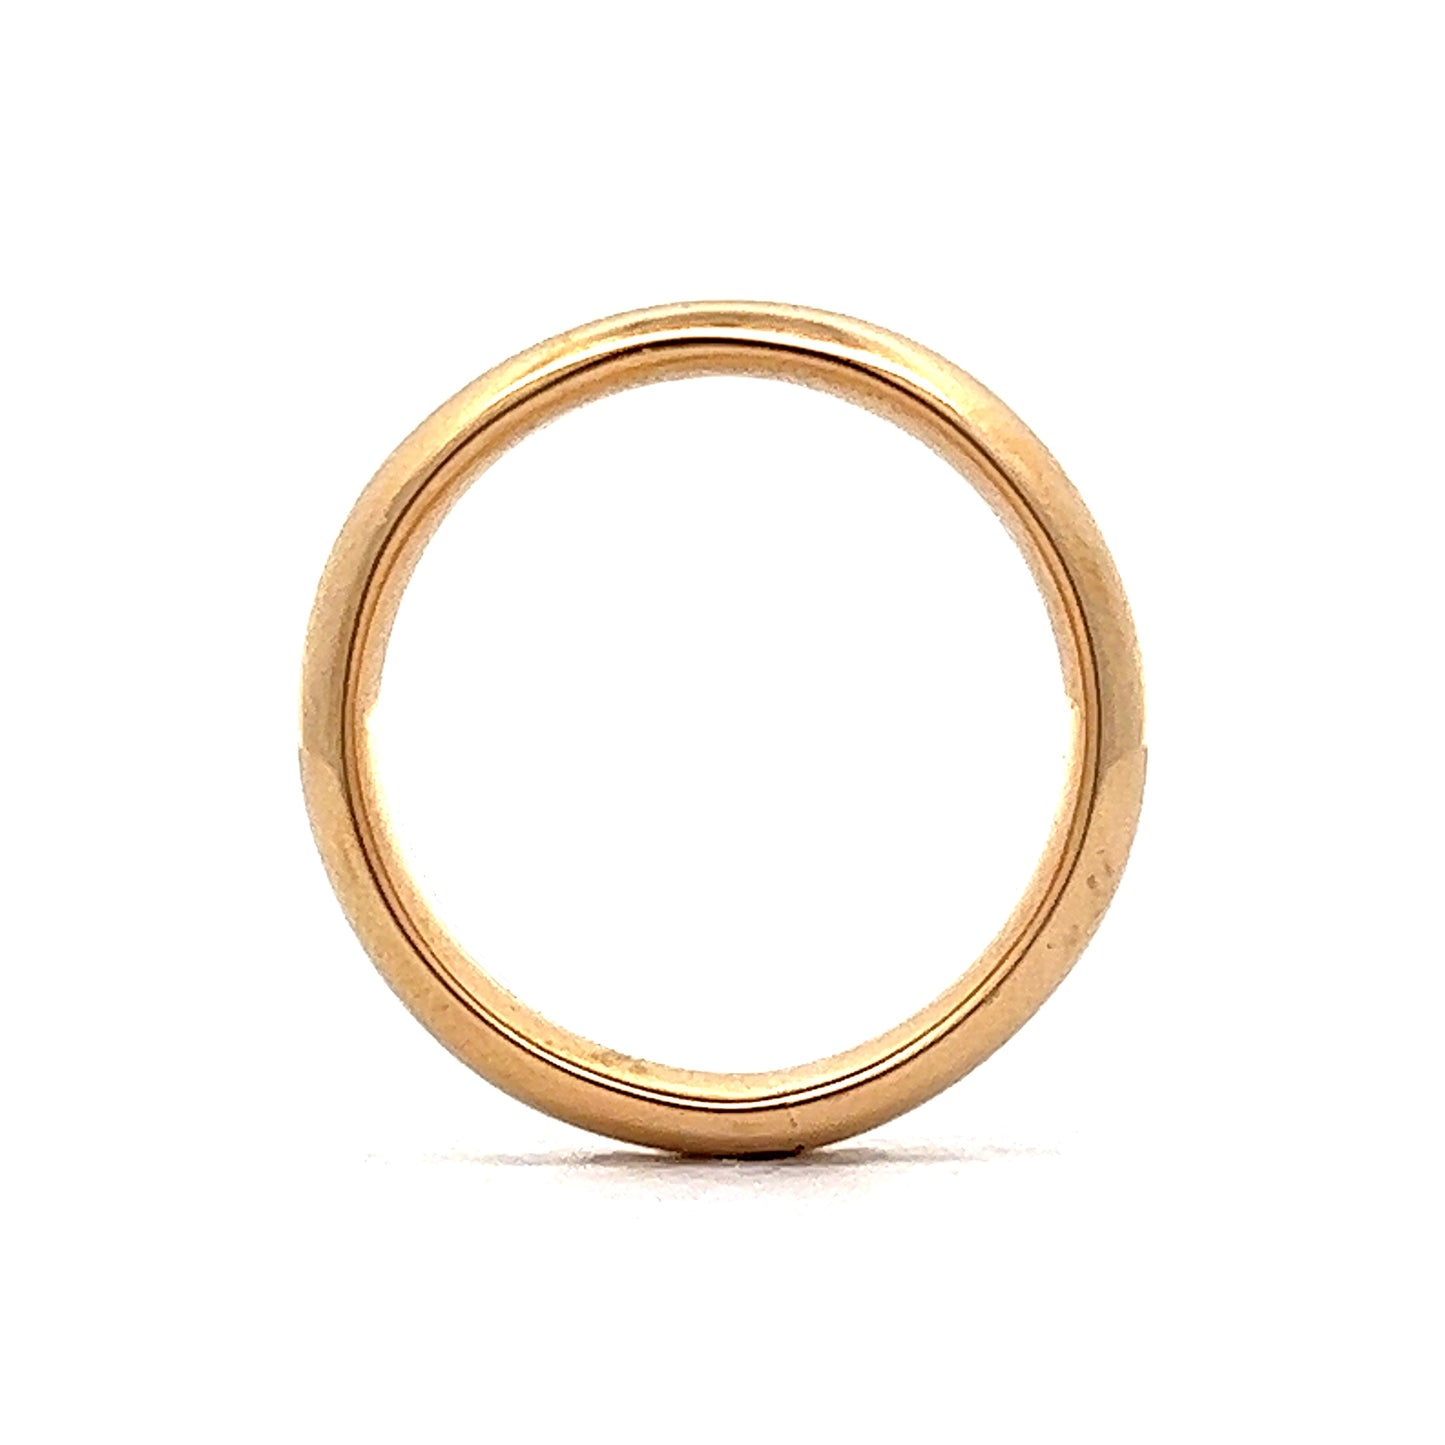 Men's 4mm Comfort Fit Wedding Band in 18k Yellow Gold